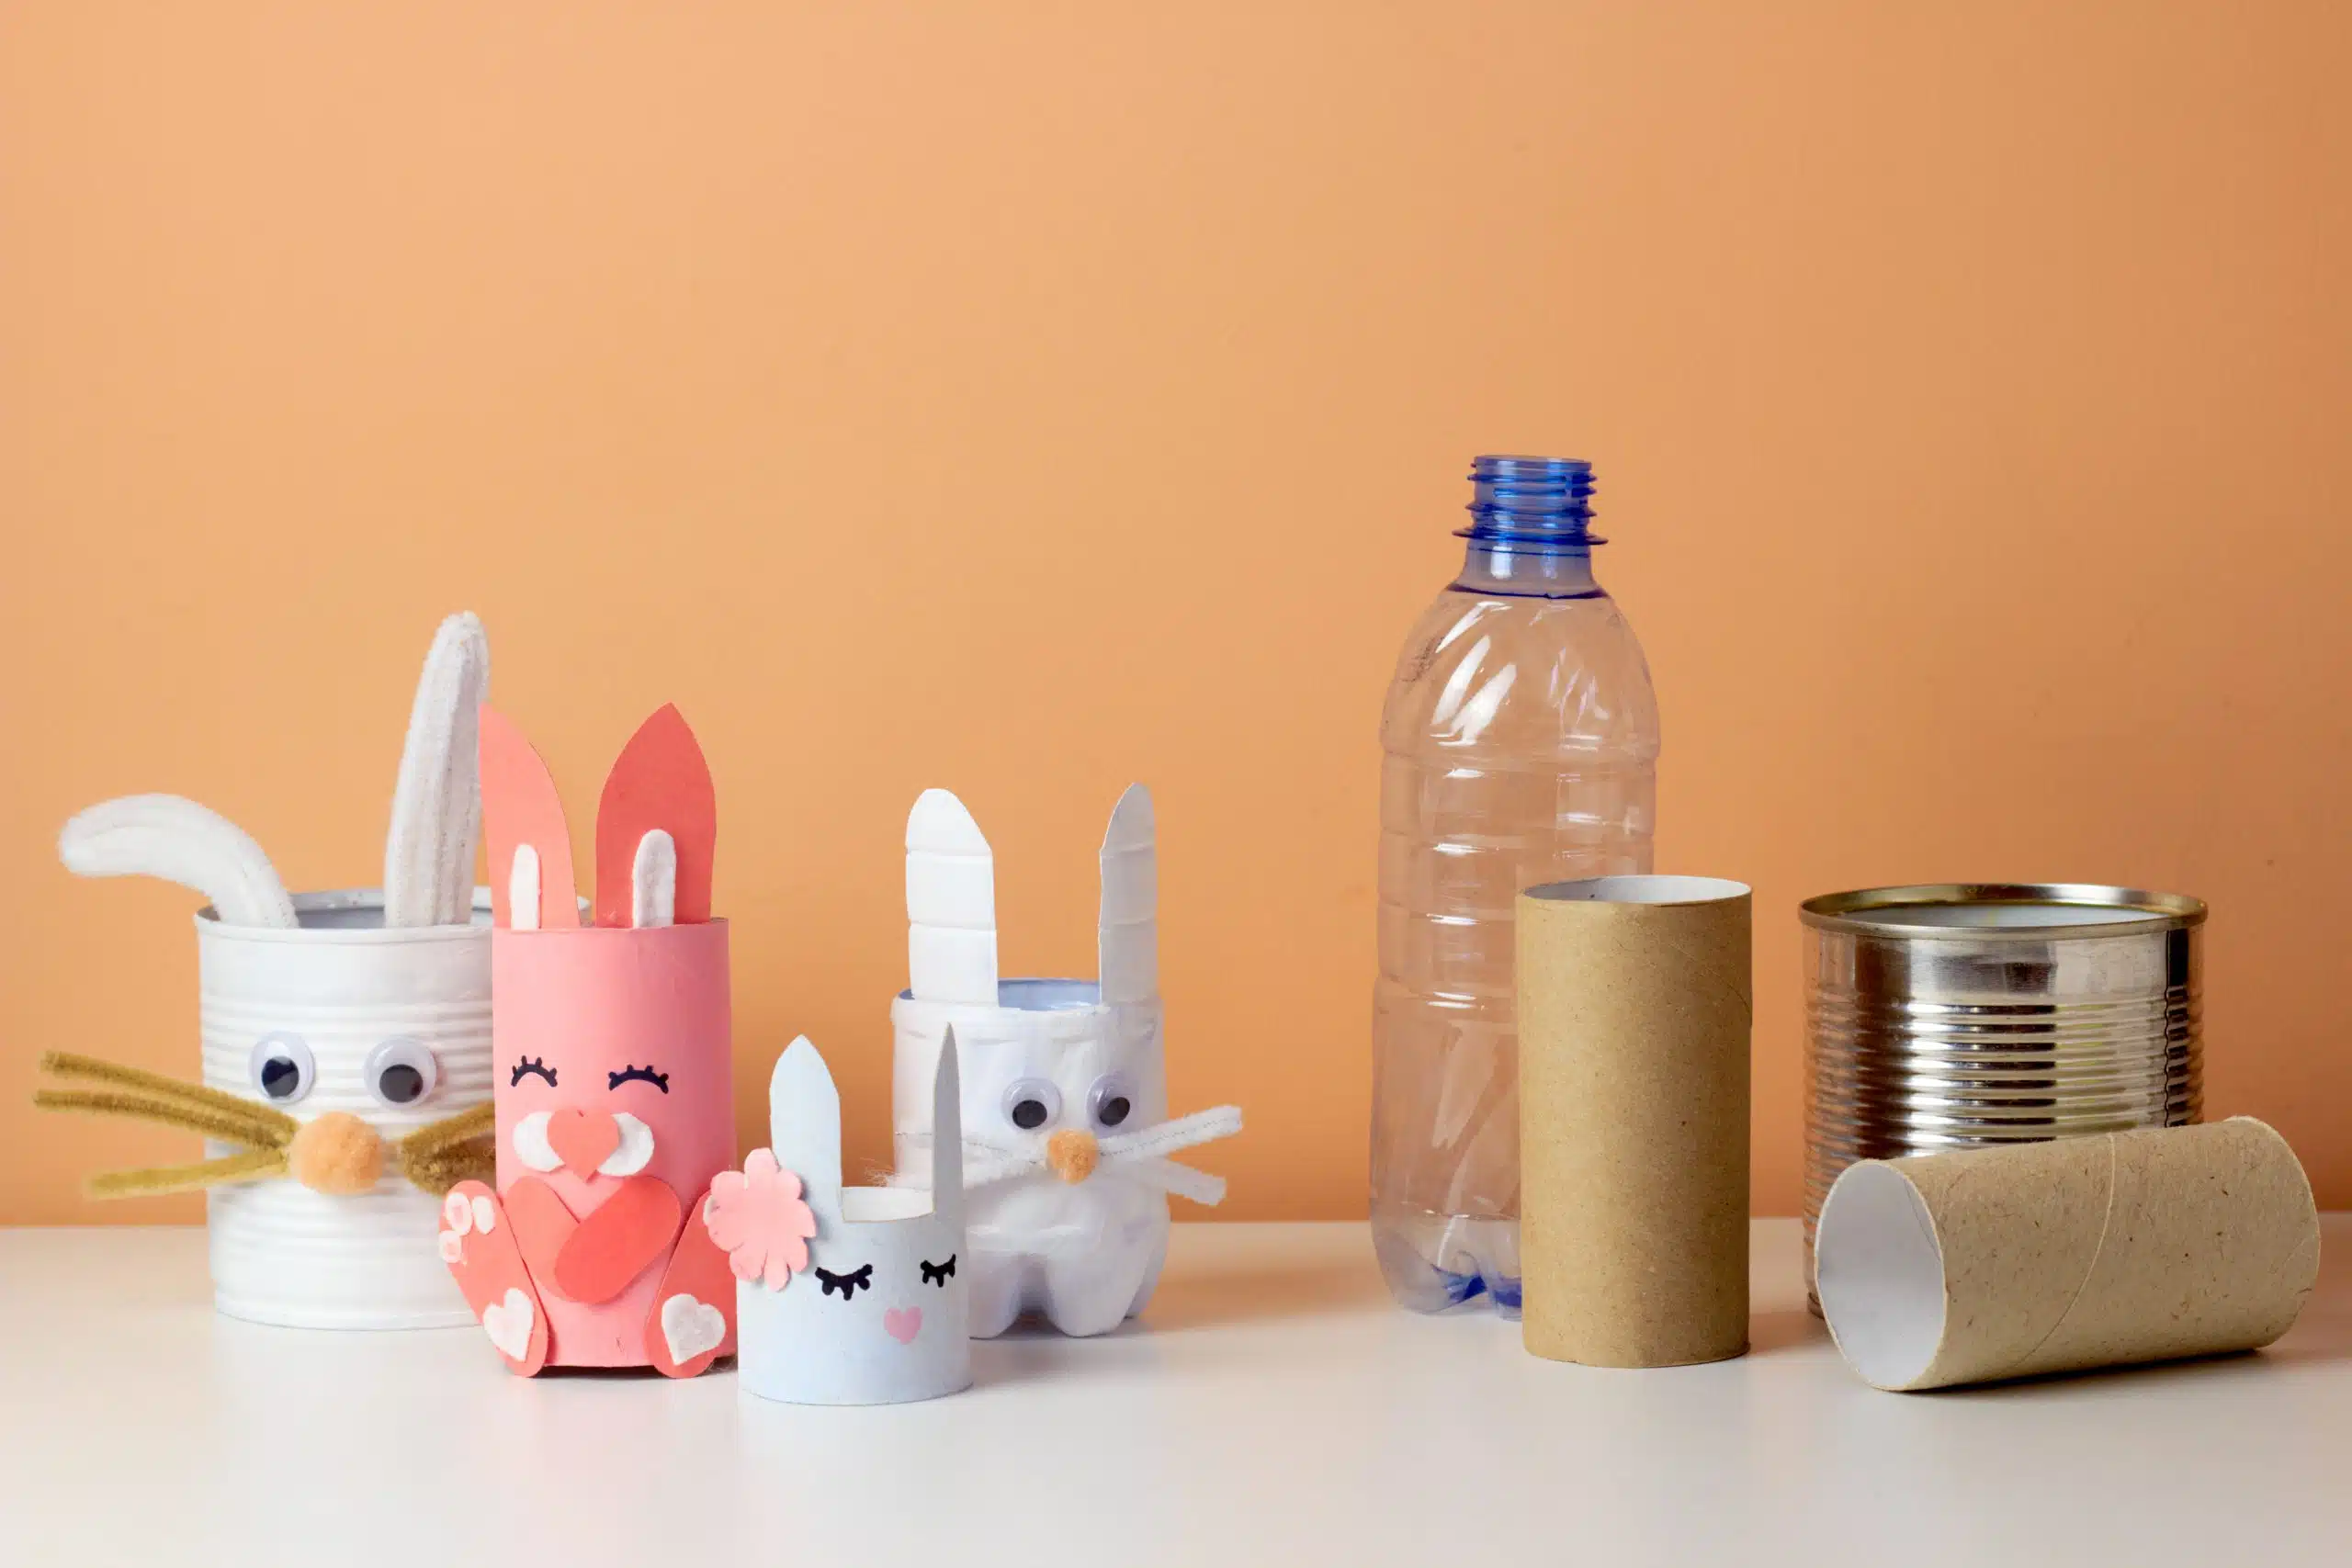 Reuse concept art from tin can, toilet tube, plastic bottle. Eco friendly bunny craft. Handmade decoration easter rabbit. Kids DIY ideas